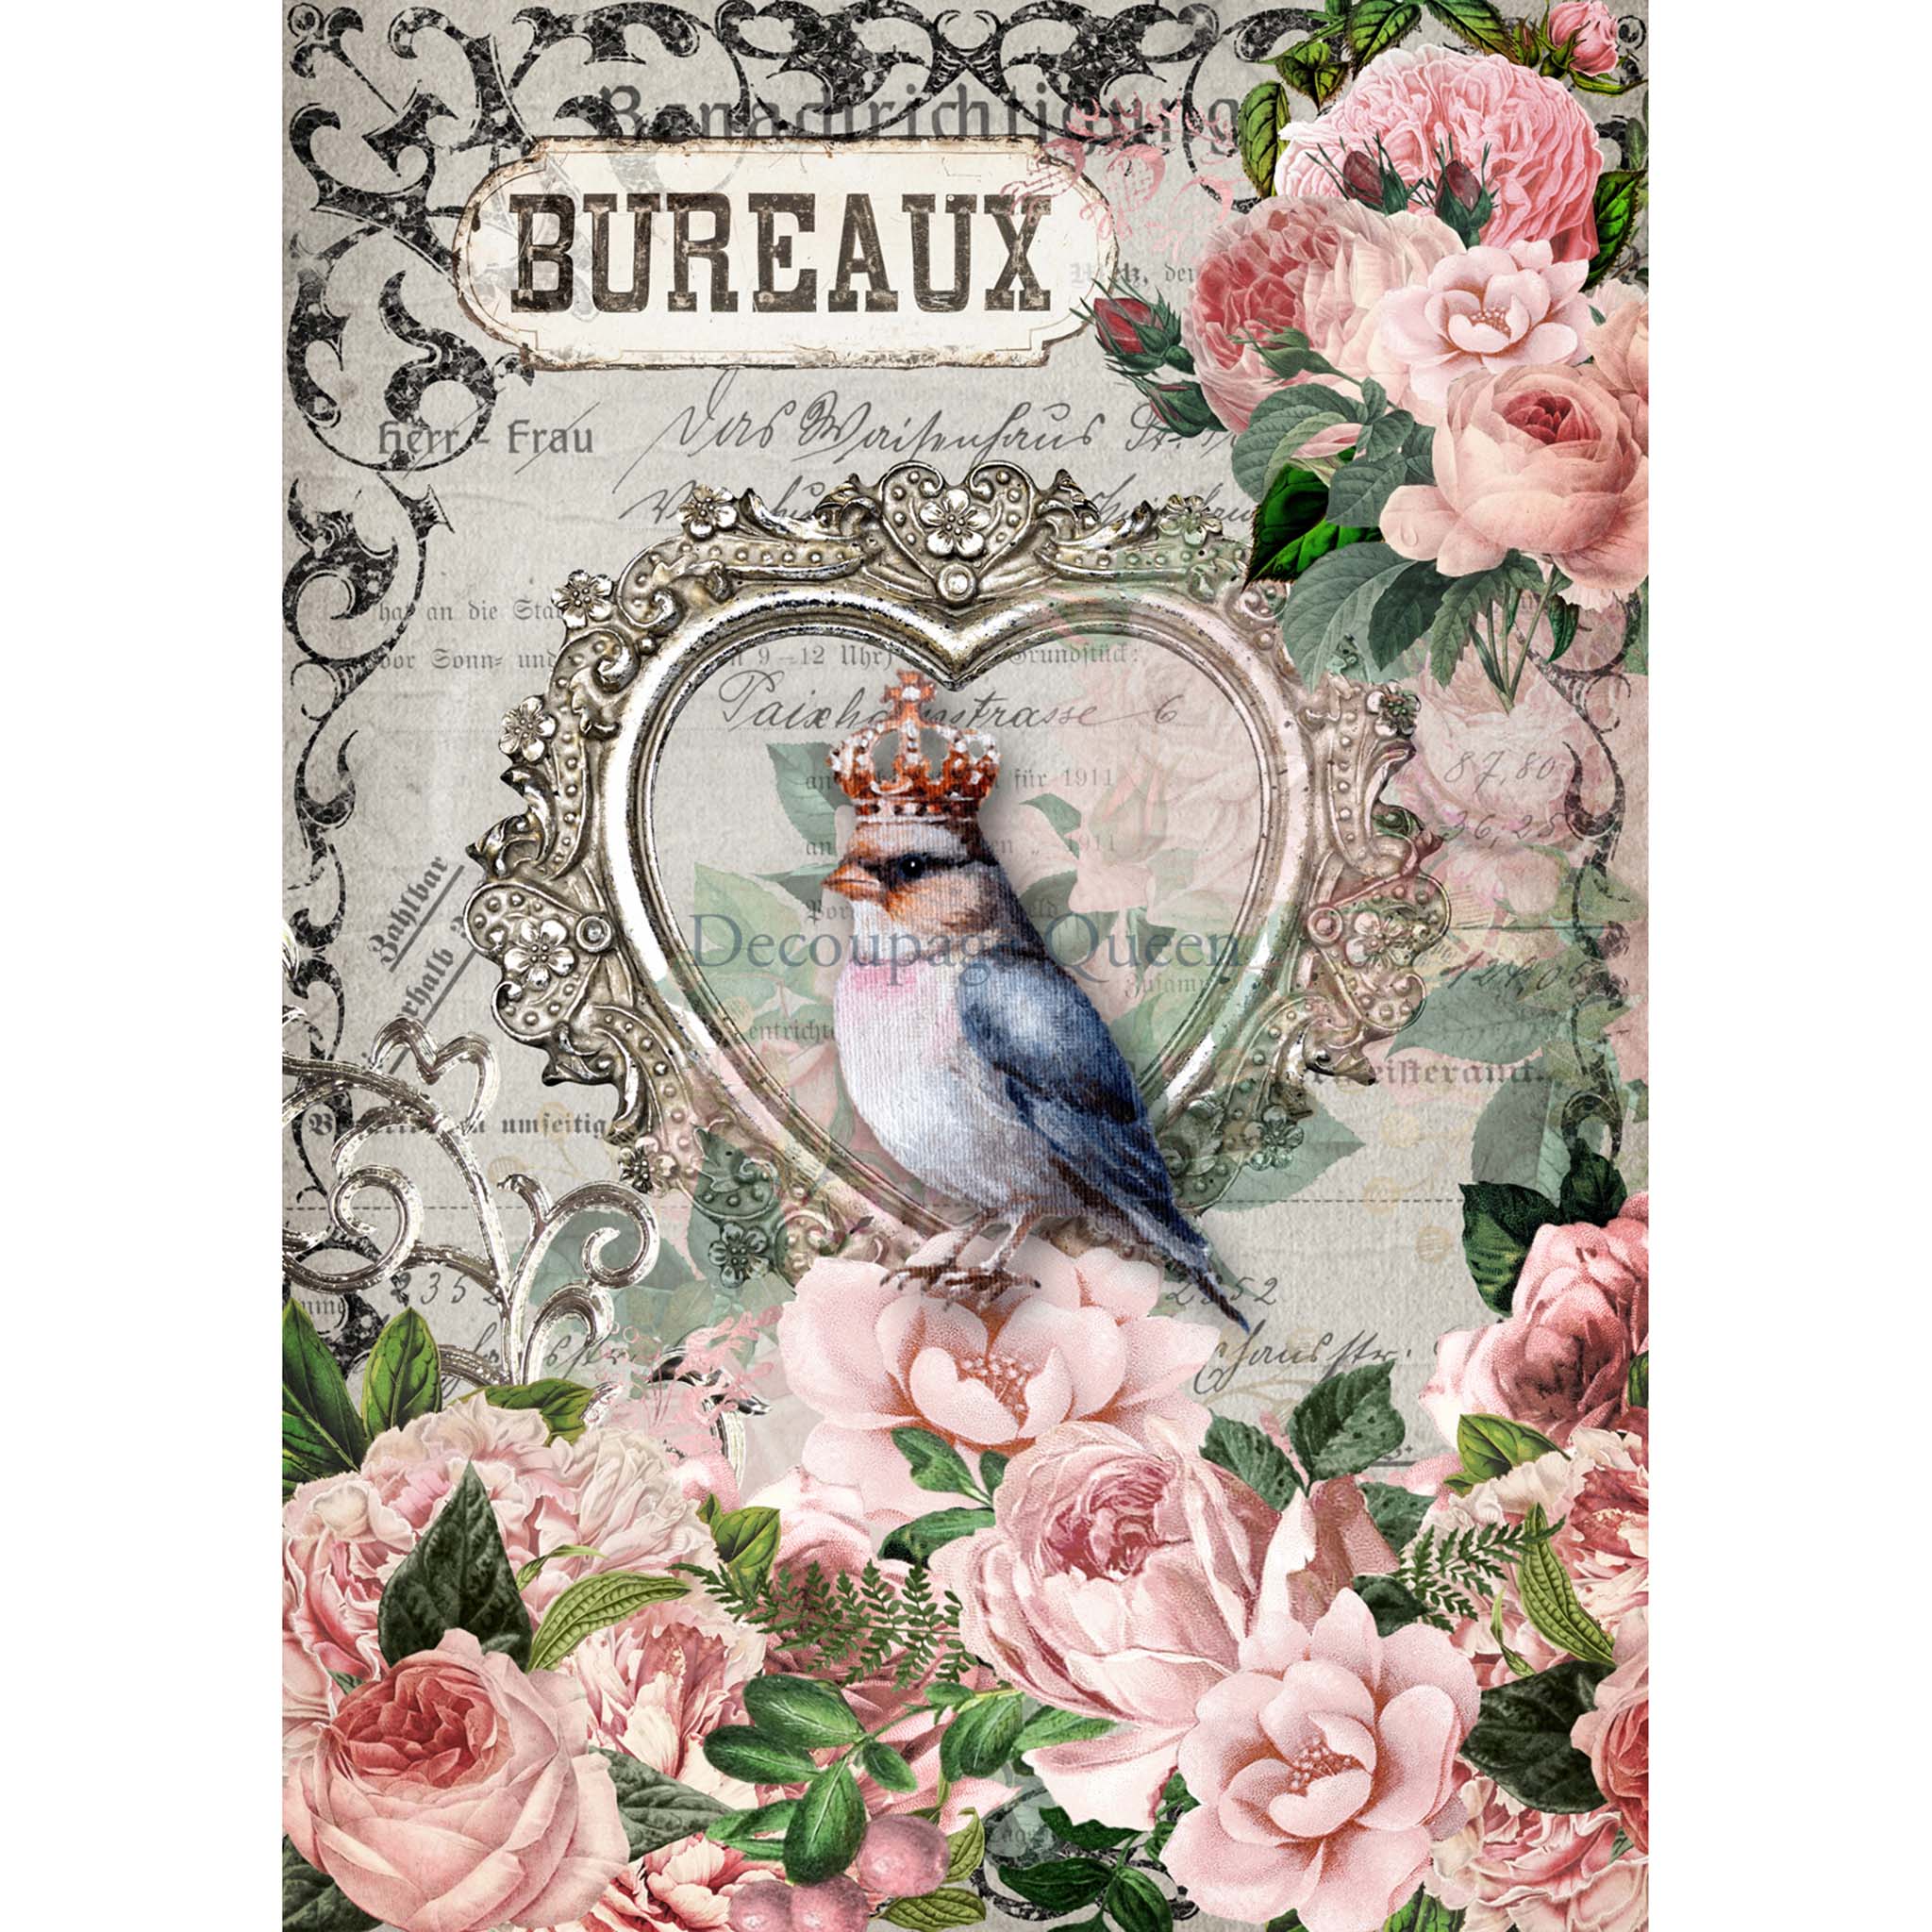 A0 rice paper design that features delicate pink roses, a charming bluebird wearing a crown while sitting in a heart picture frame, and a vintage French document. White borders are on the sides.